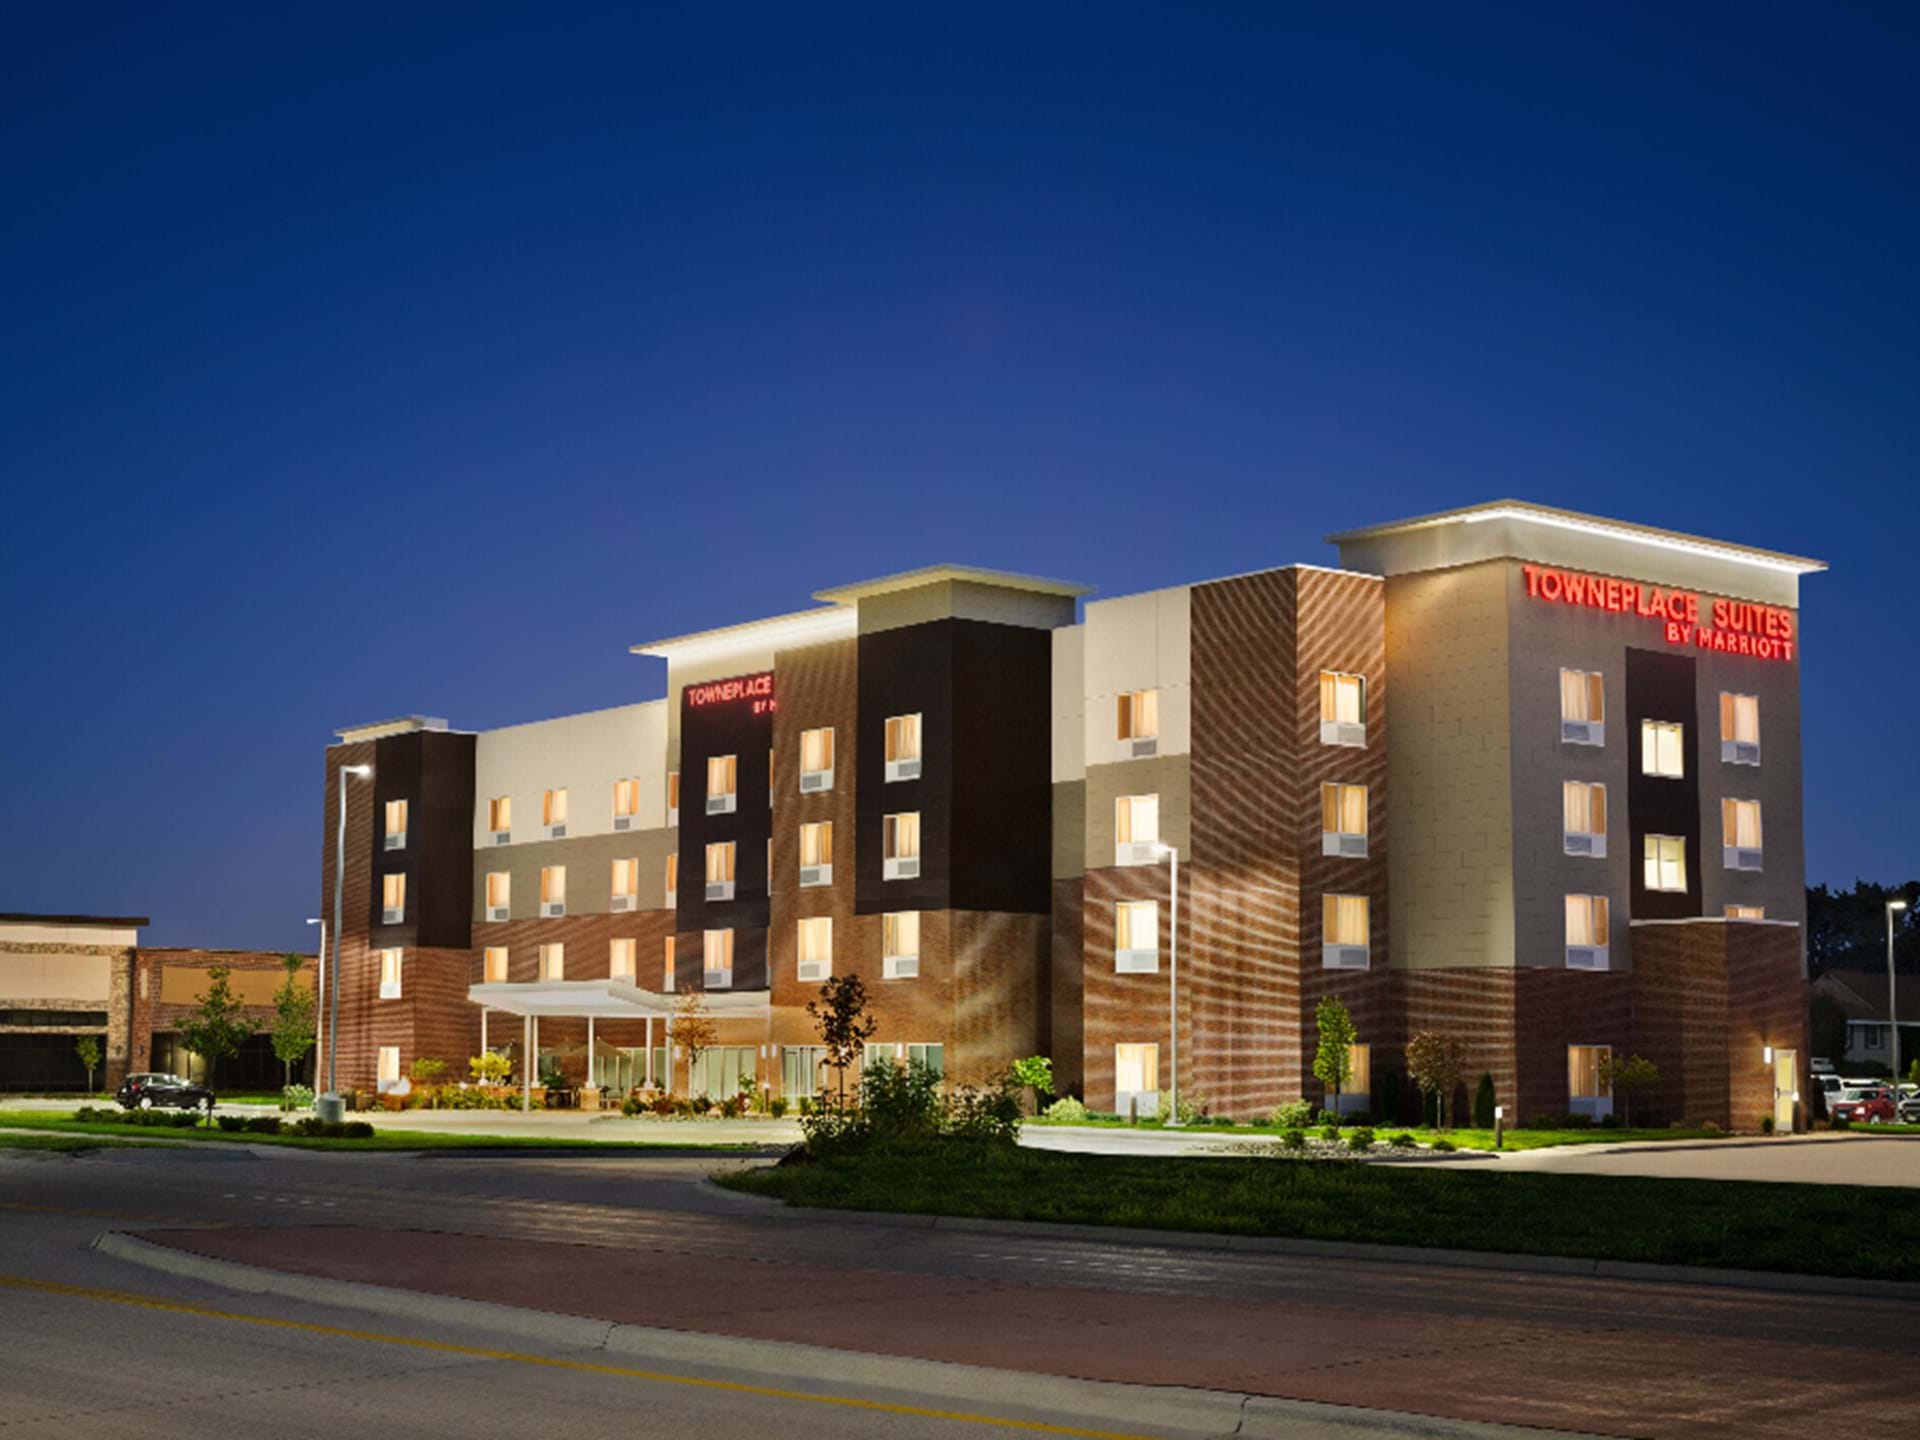 Our hotel is conveniently located in Marion, Iowa and has all of the amenities you need while away from home.